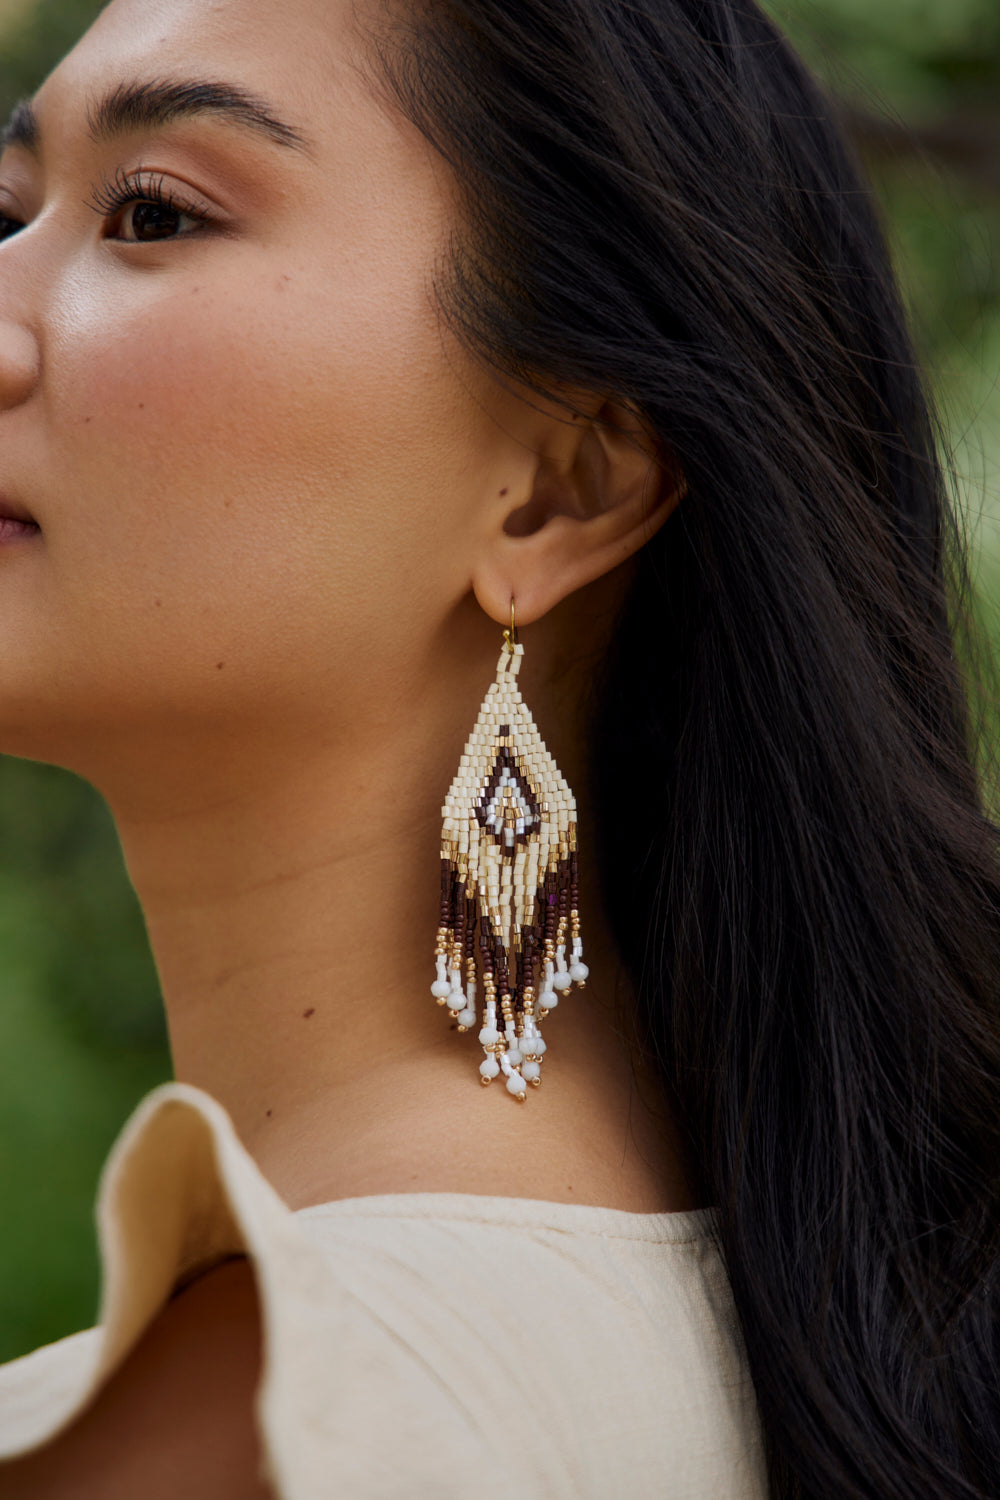 Women's beaded drop earrings with gold accents